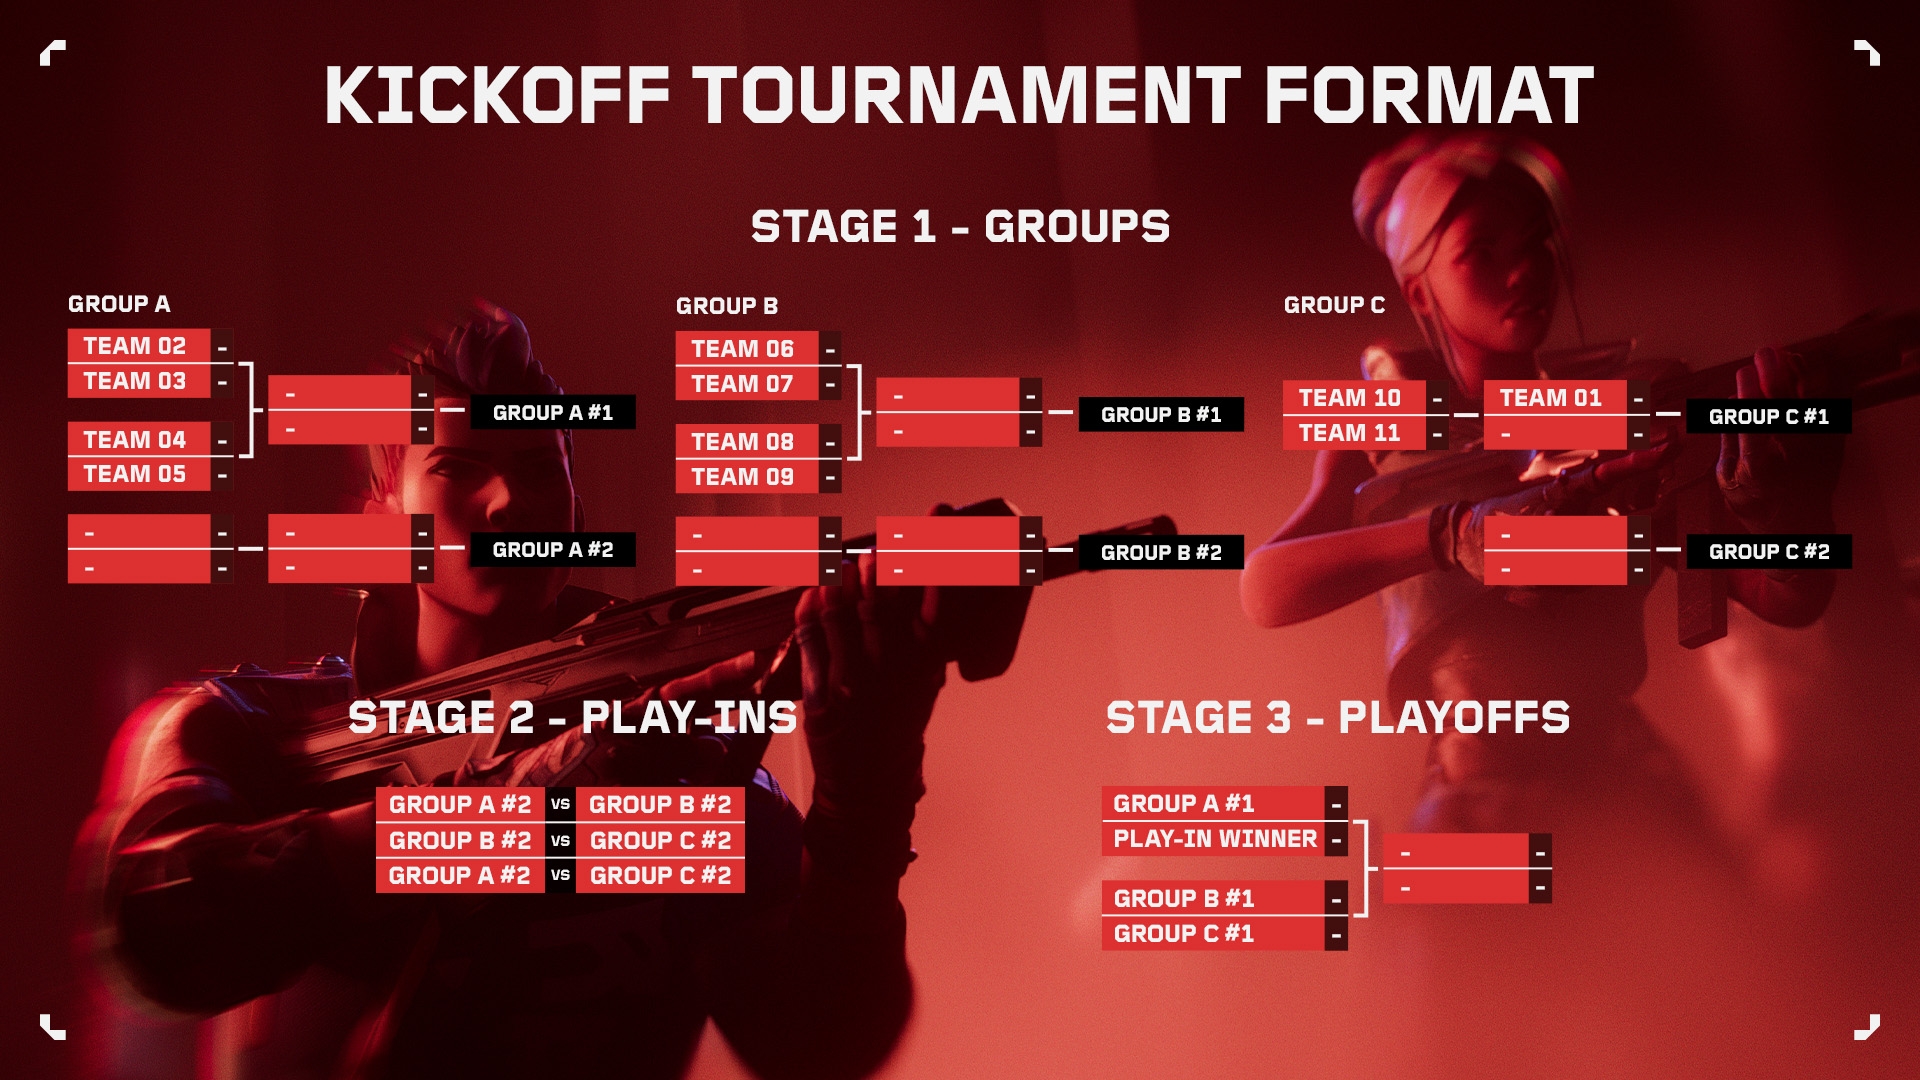 VCT Americas Kickoff Format, Schedule, Teams and more